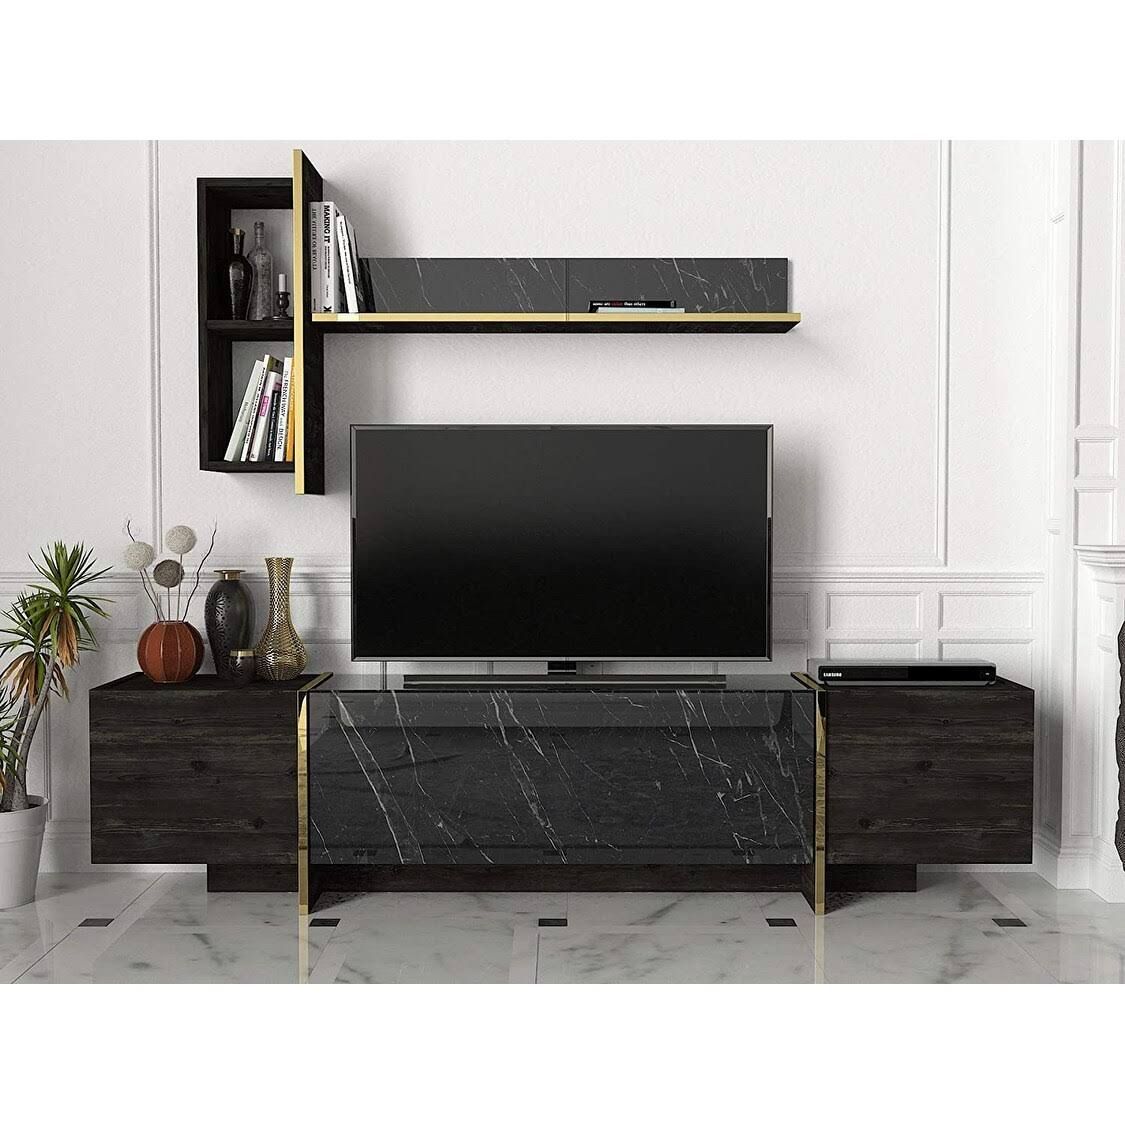 Sayre Furniture Veyron Tv Unit Black Rebab Black Marble – Wgl 1 S Pertaining To Black Marble Tv Stands (View 3 of 20)